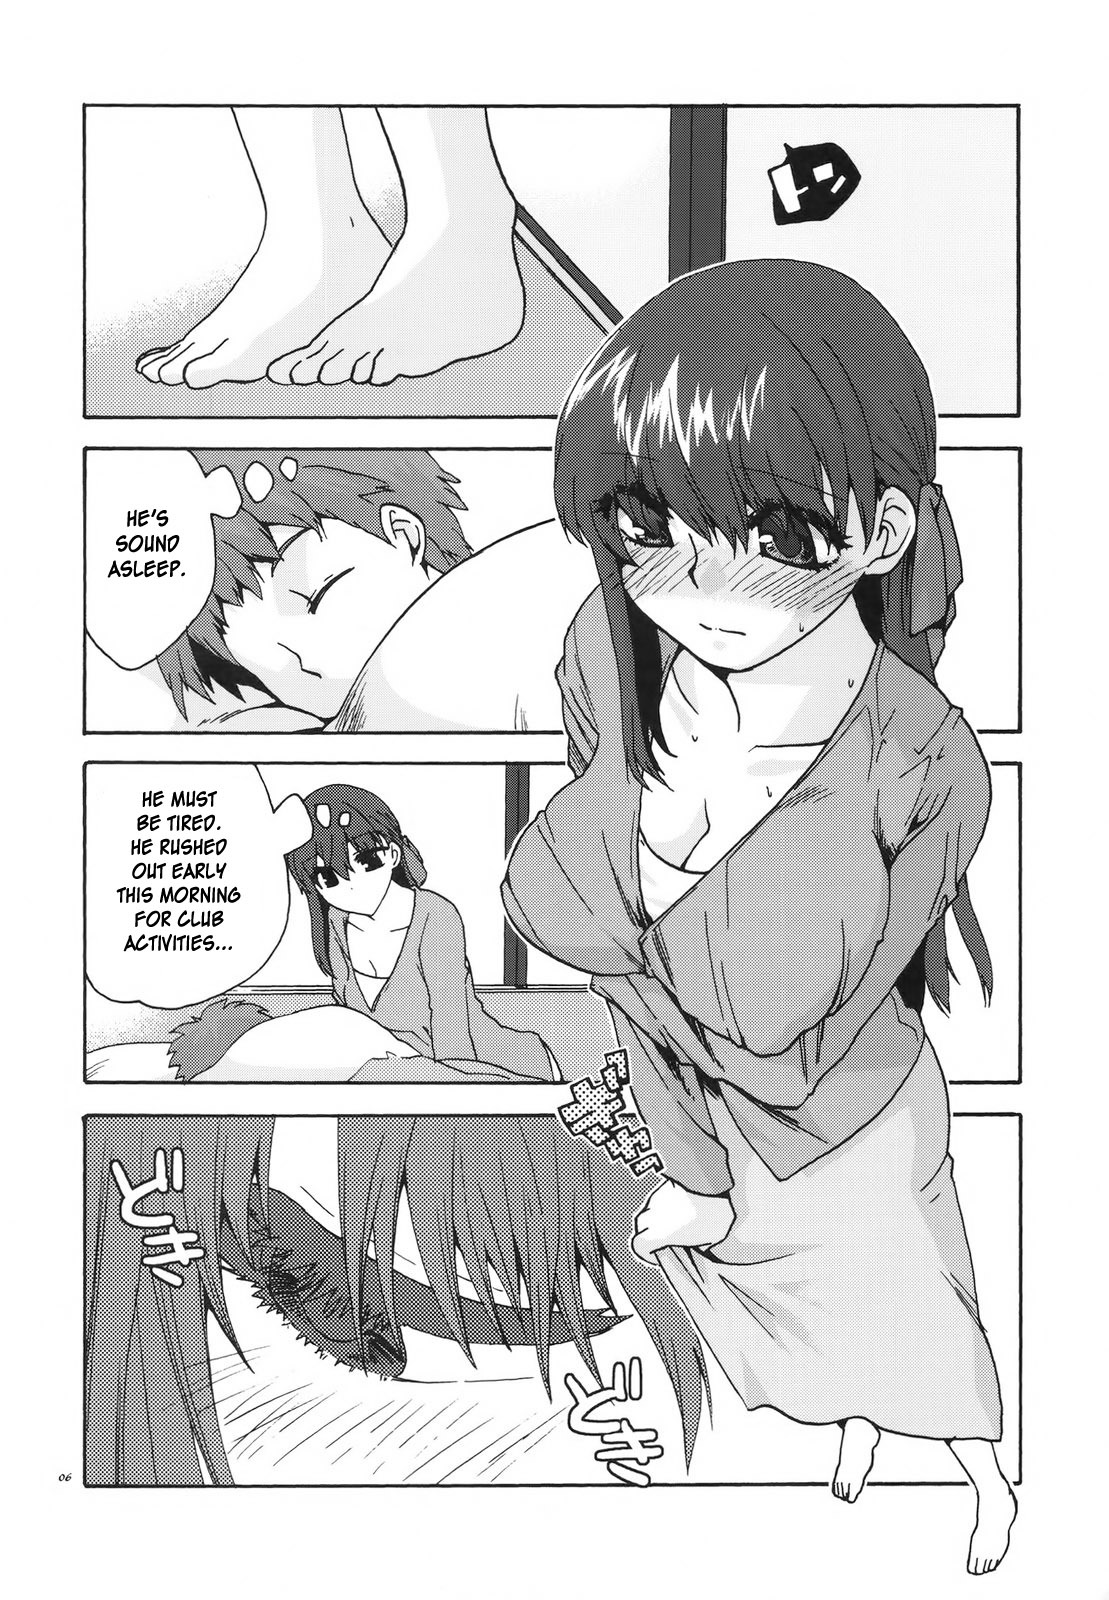 (C78) [TRIP SPIDER (niwacho)] Crime and Affection (Fate/Stay Night) [English] [desudesu] page 6 full